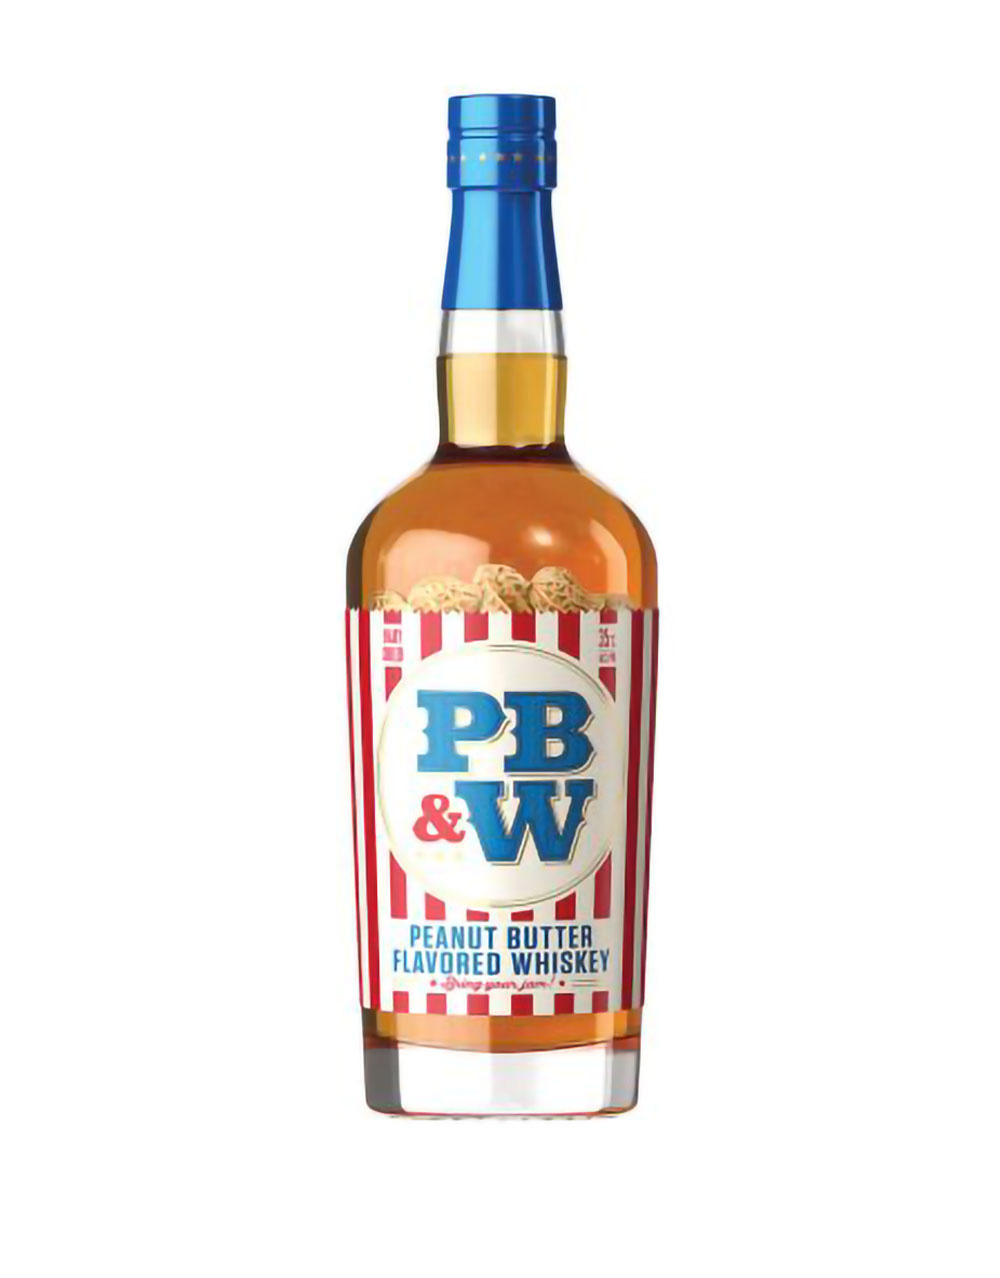 PB&W Peanut Butter Flavored Whisky